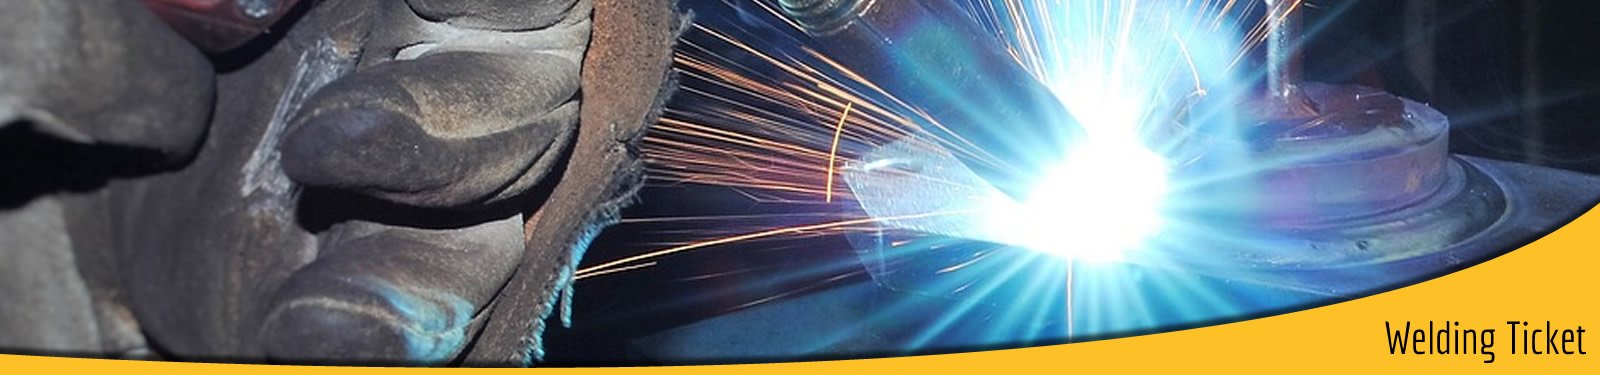 Welding Ticket/Certification courses available